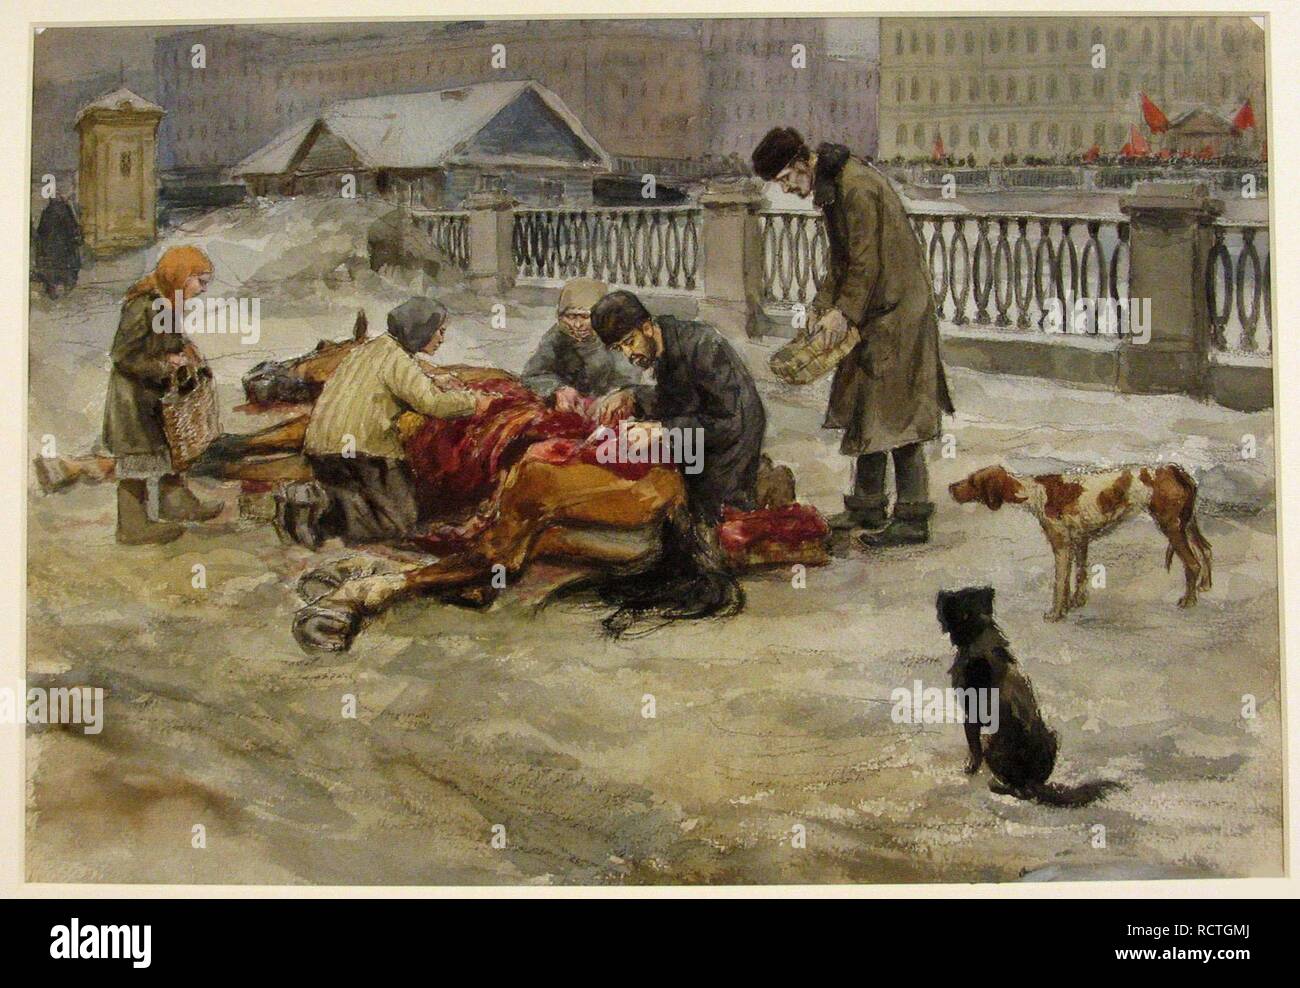 Petrograd in 1918 (from the series of watercolors Russian revolution). Museum: State Museum of Revolution, Moscow. Author: Vladimirov, Ivan Alexeyevich. Stock Photo